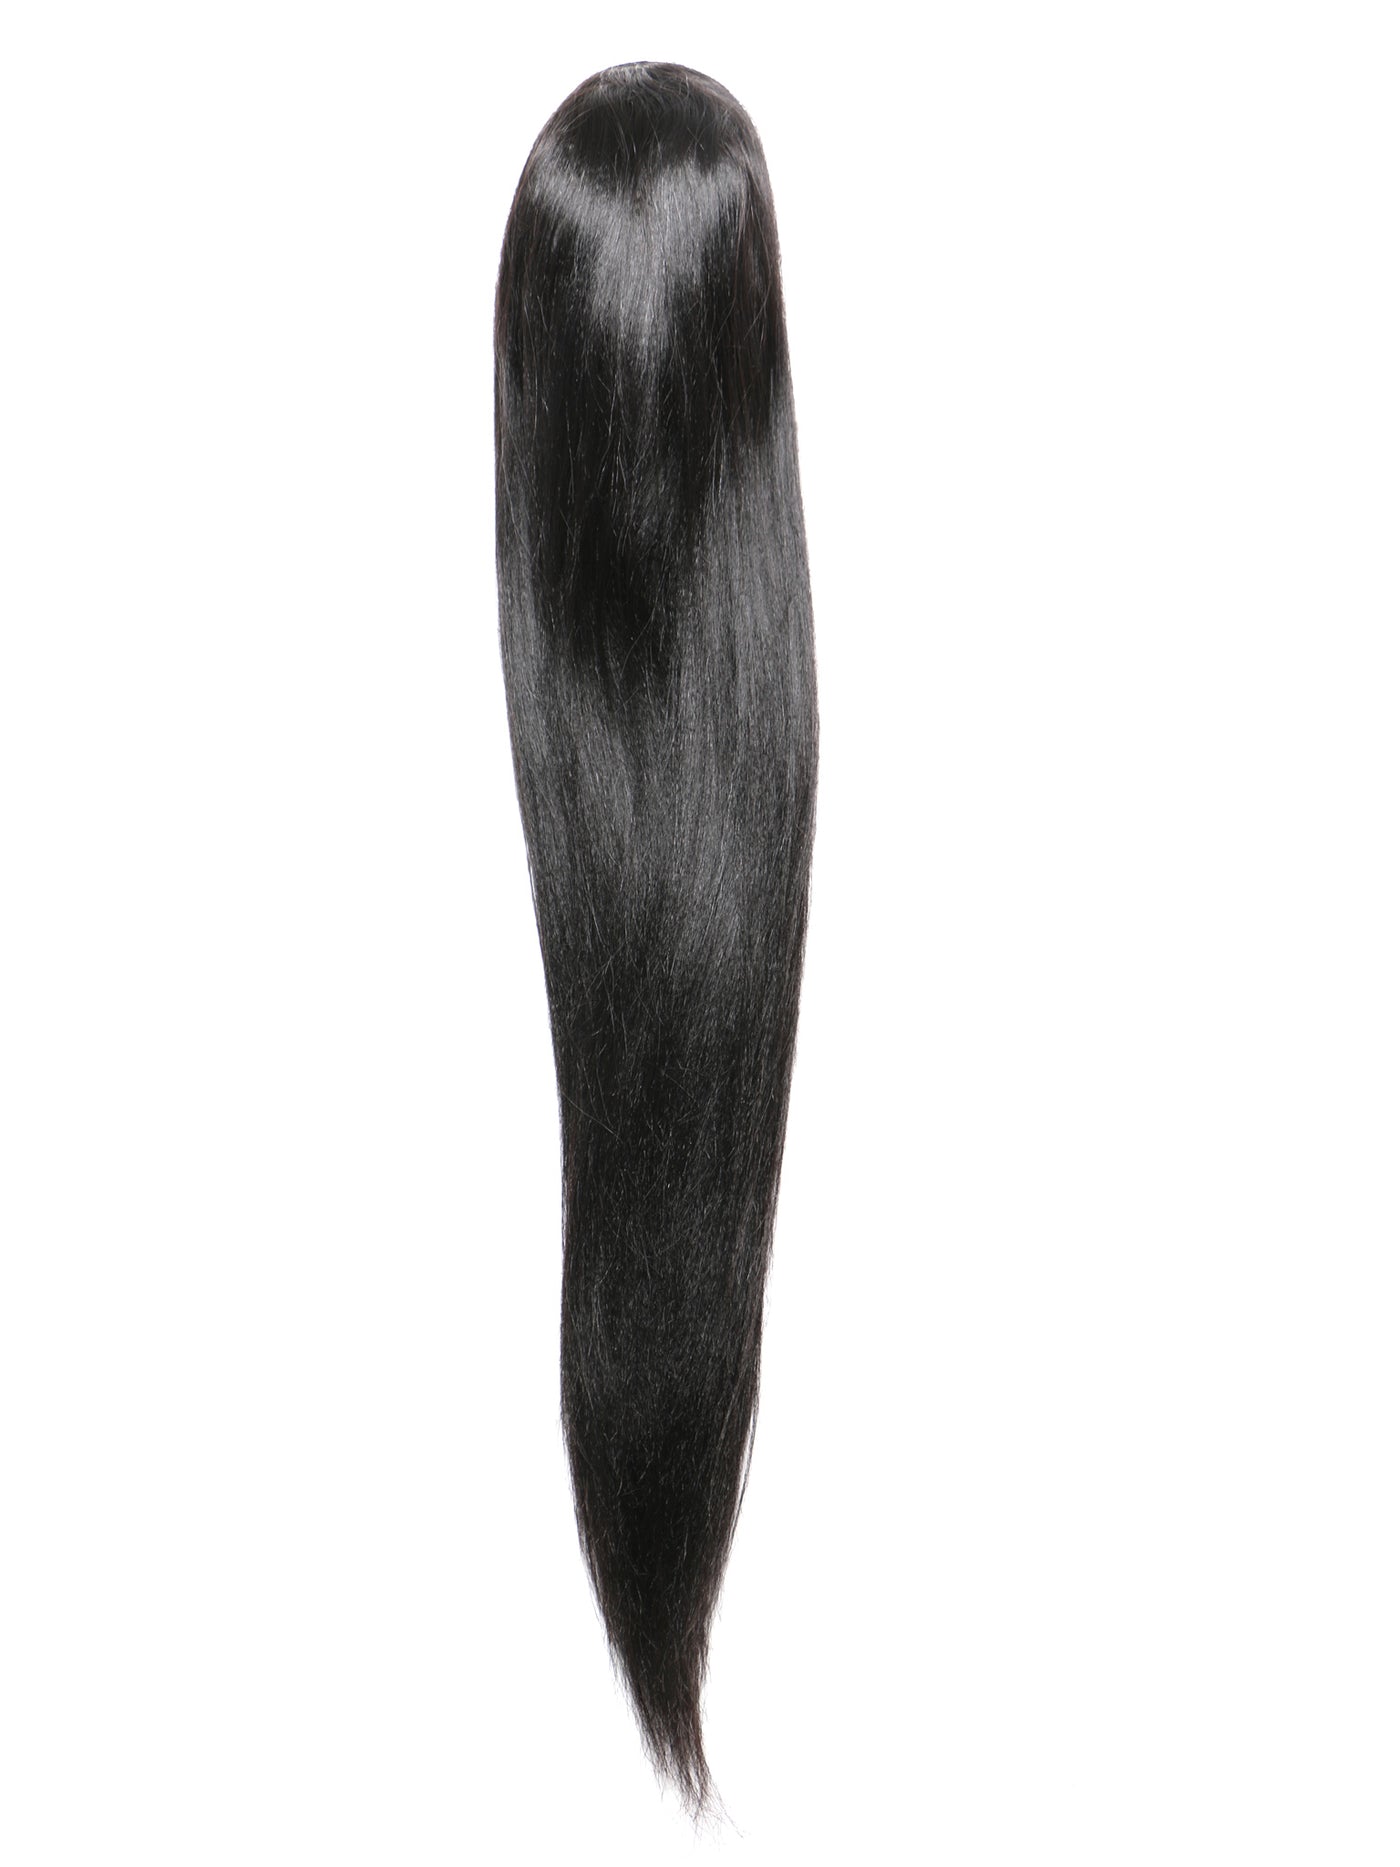 Indique Relaxed Straight Clip In Hair Extensions Human Hair